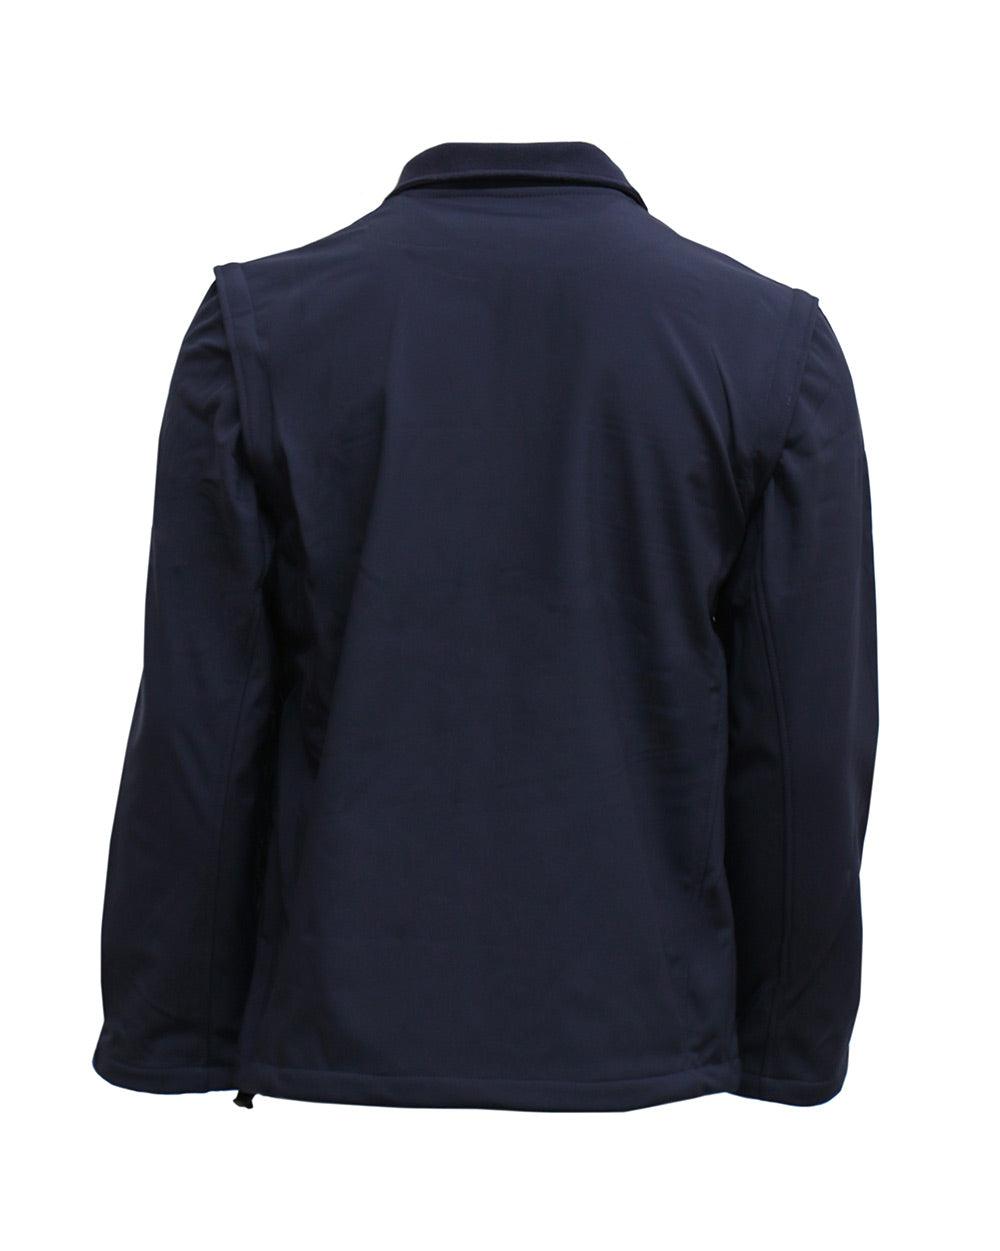 2 in 1 Softshell Jacket - Base Thermals